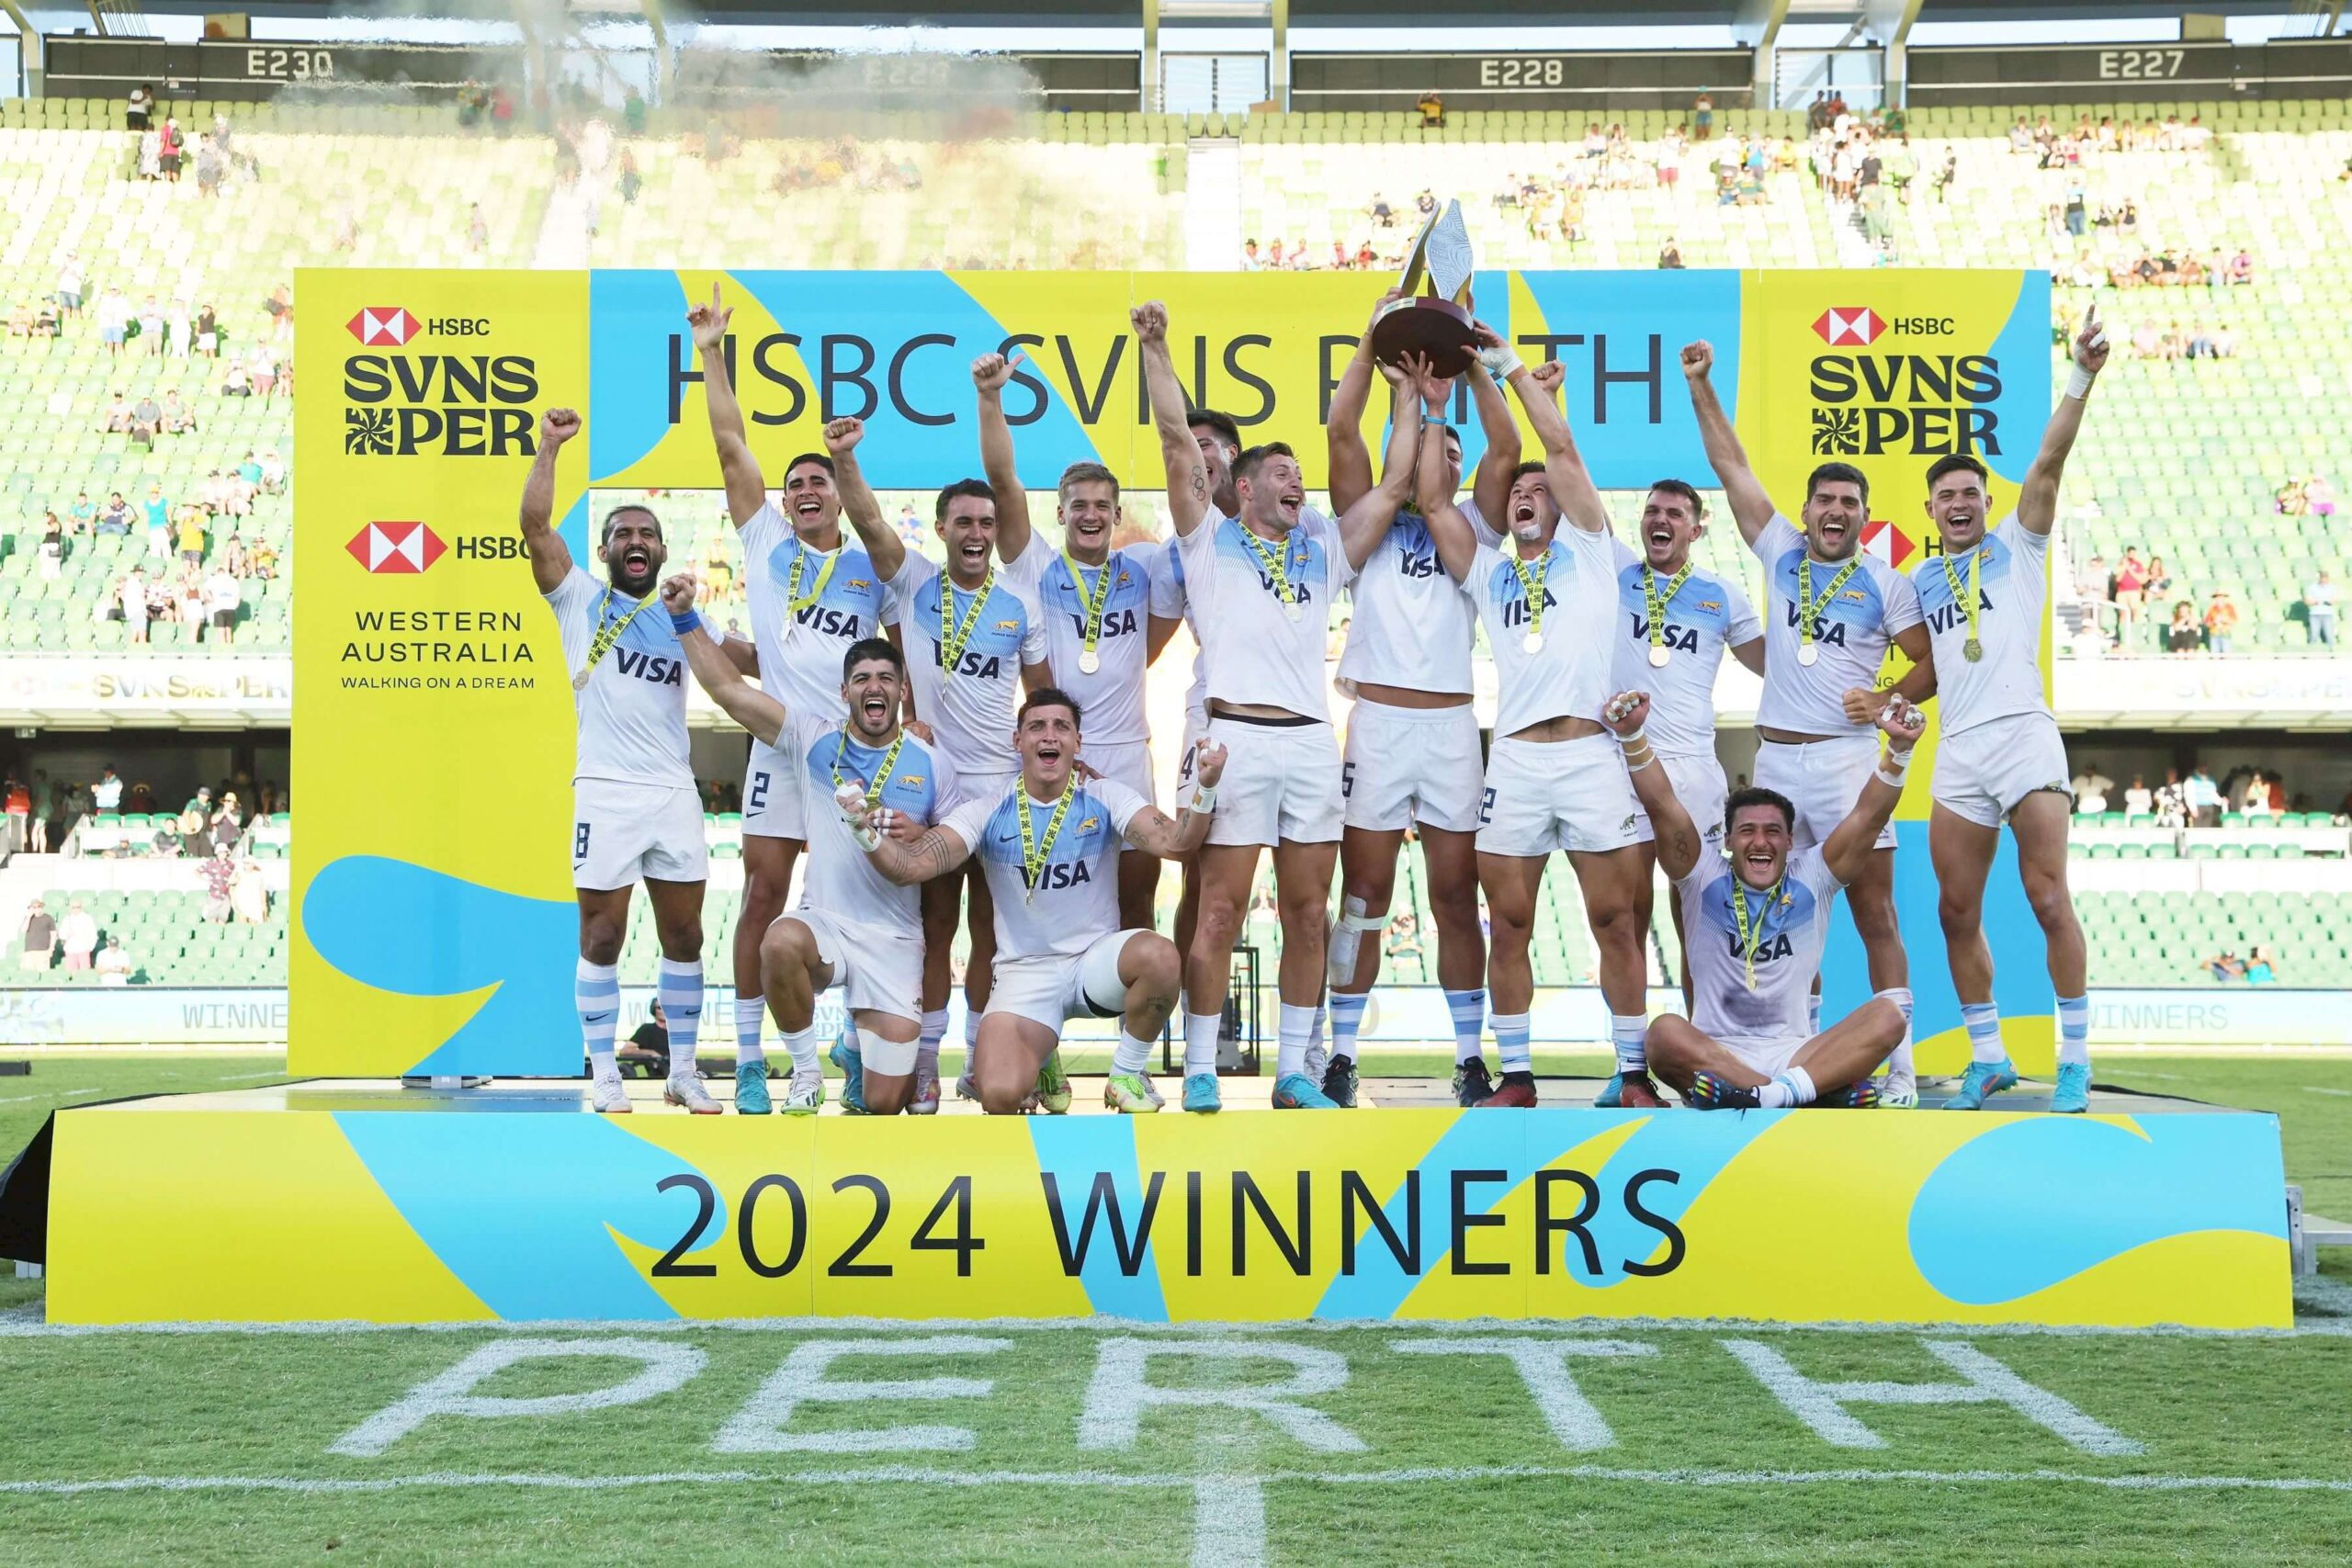 Argentina players celebrate the cup final win over Australia on day three of the HSBC SVNS at HBF Park on 28 January, 2024 in Perth, Australia.